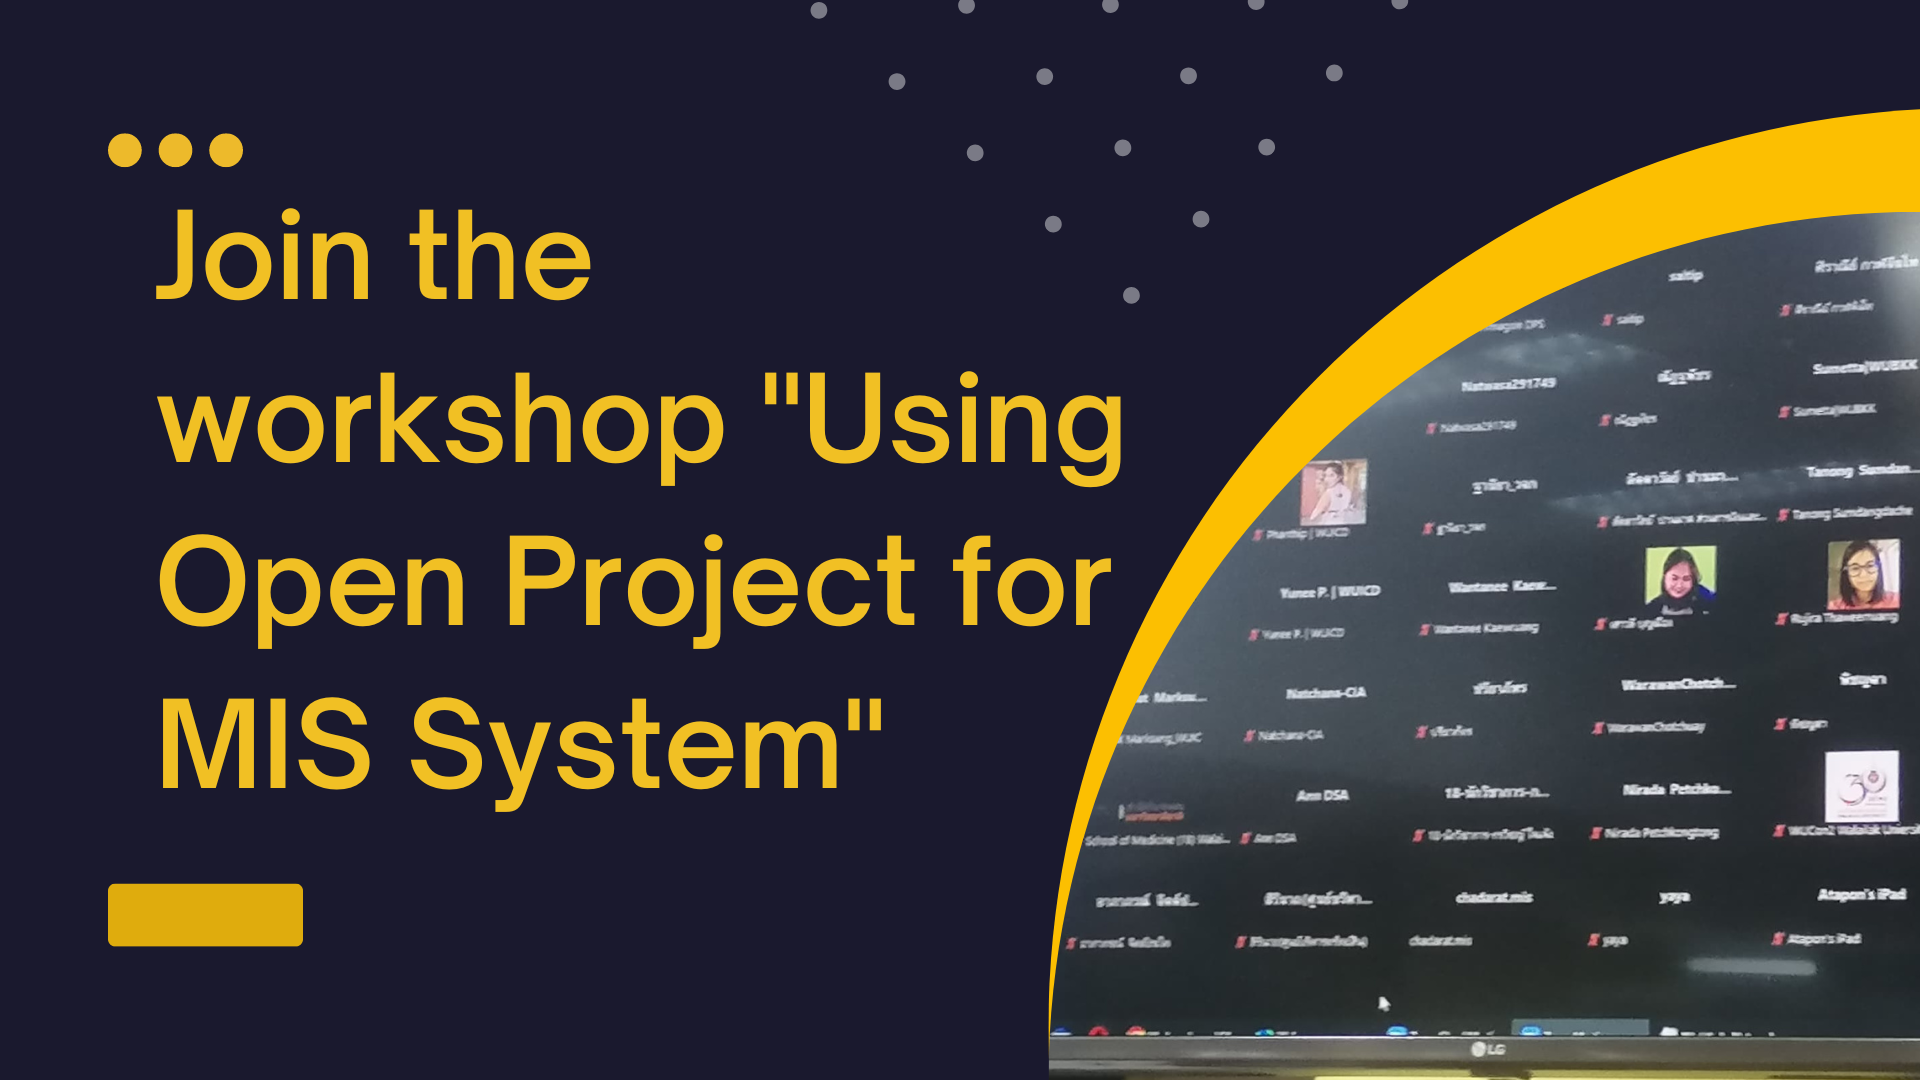 Join the workshop "Using Open Project for MIS System"